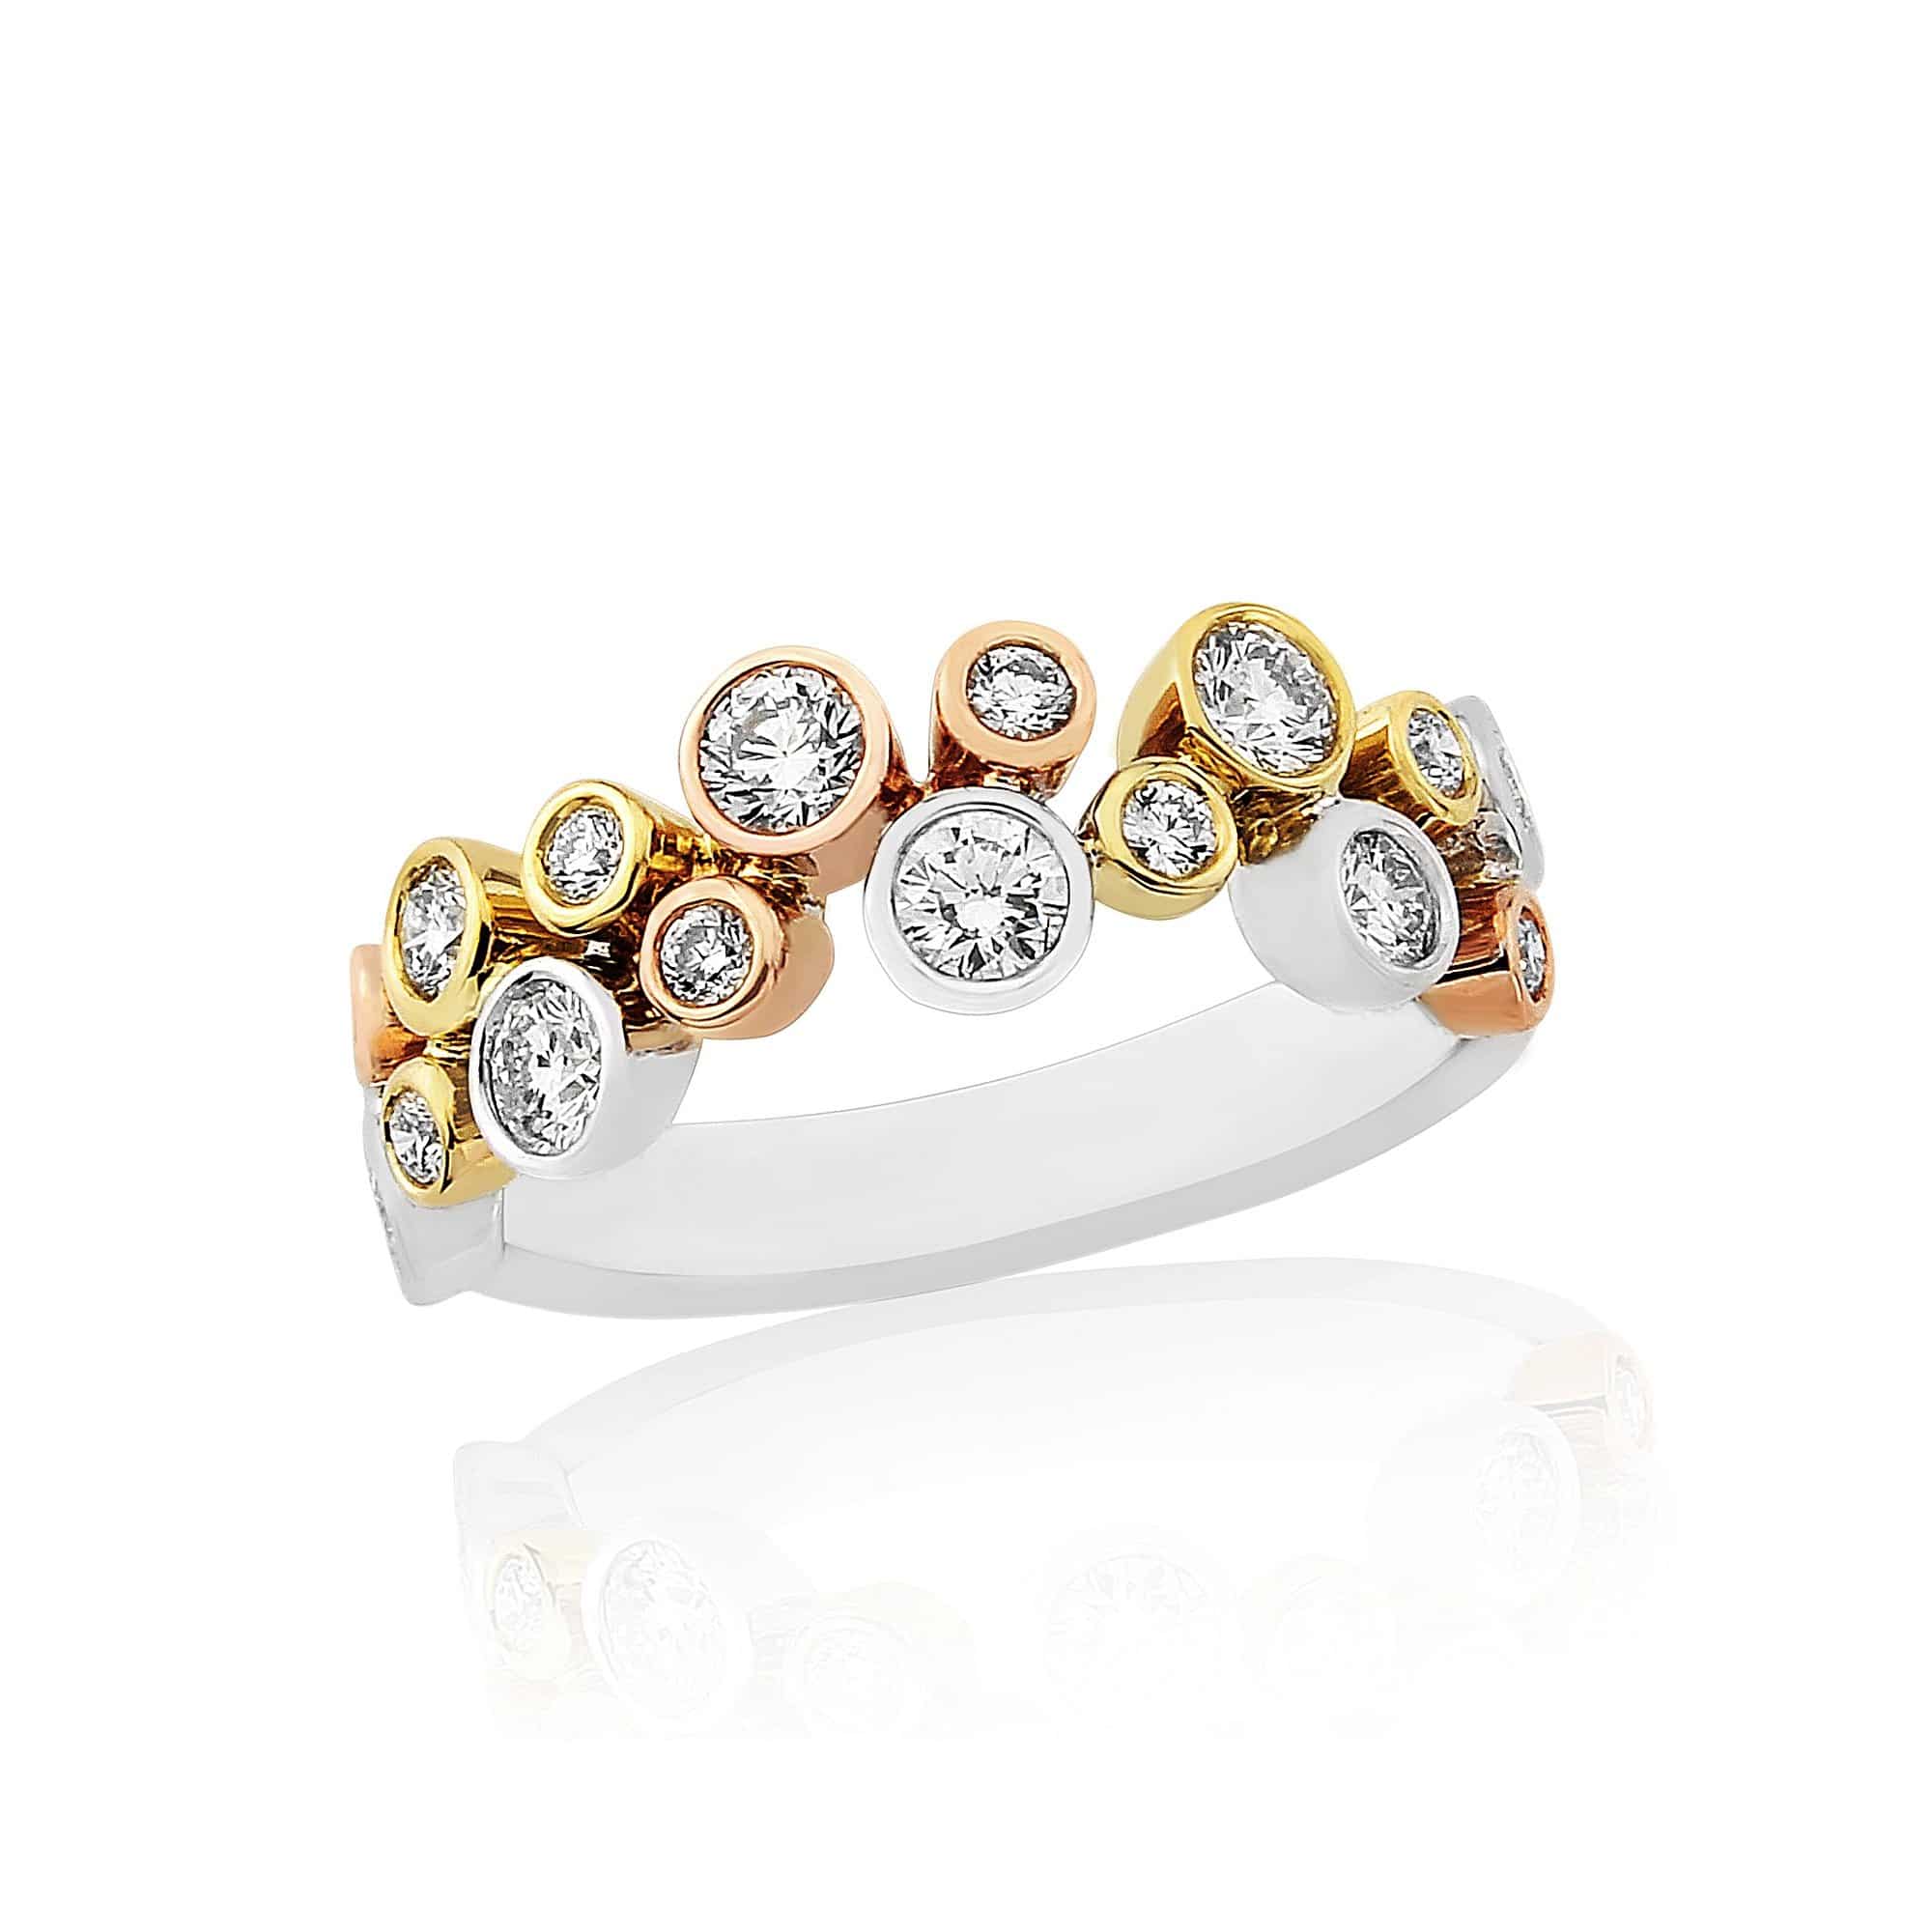 18ct White, Yellow and Rose Gold Scatter Ring, 0.75ct